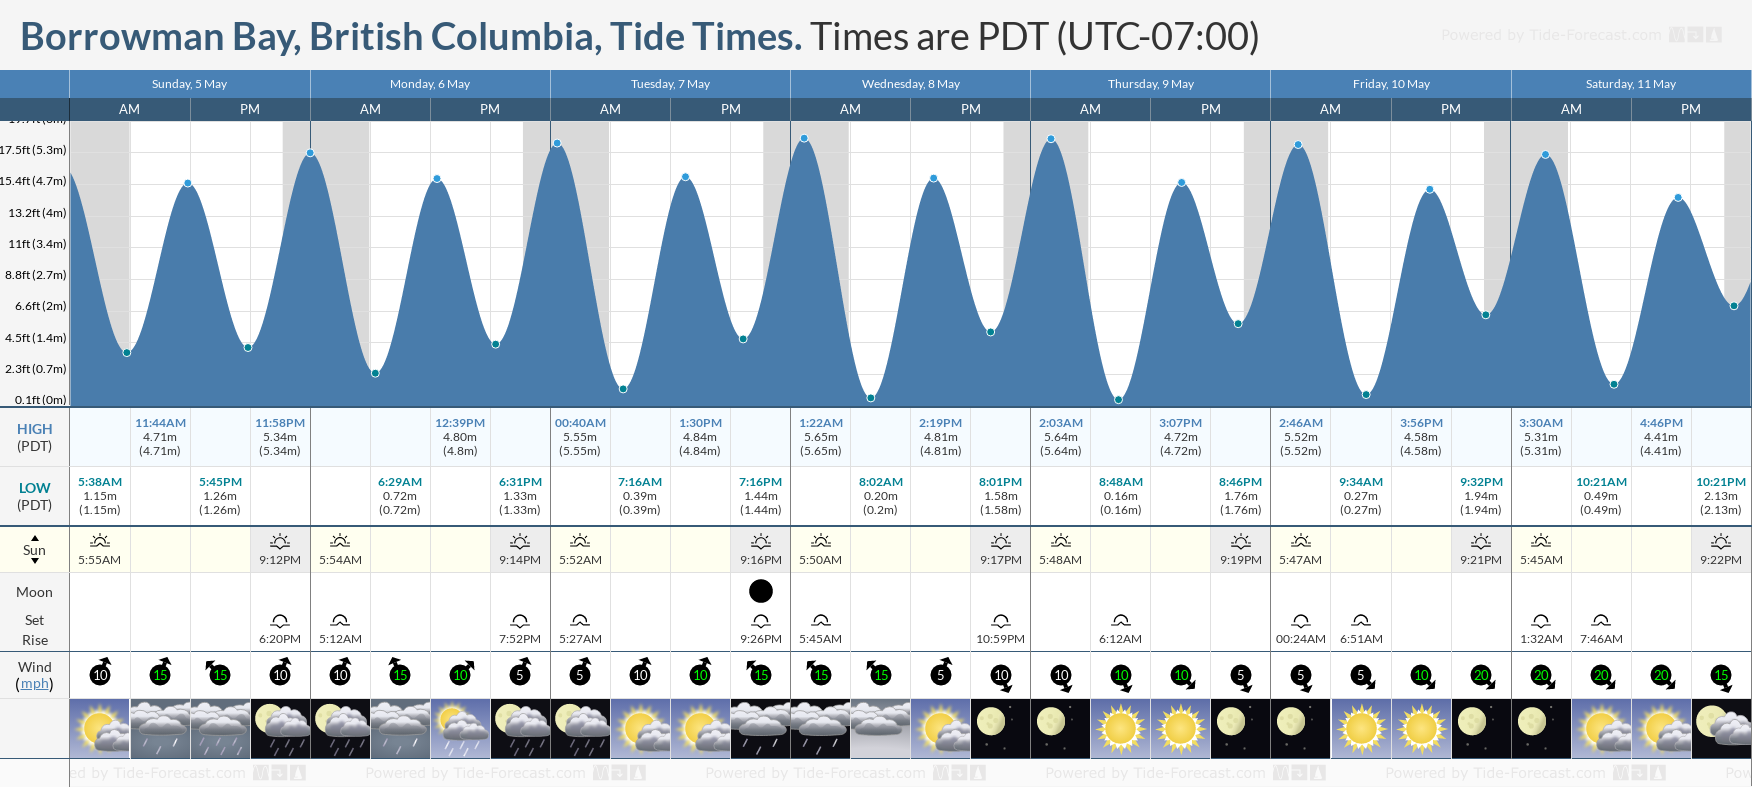 Borrowman Bay, British Columbia Tide Chart including high and low tide tide times for the next 7 days